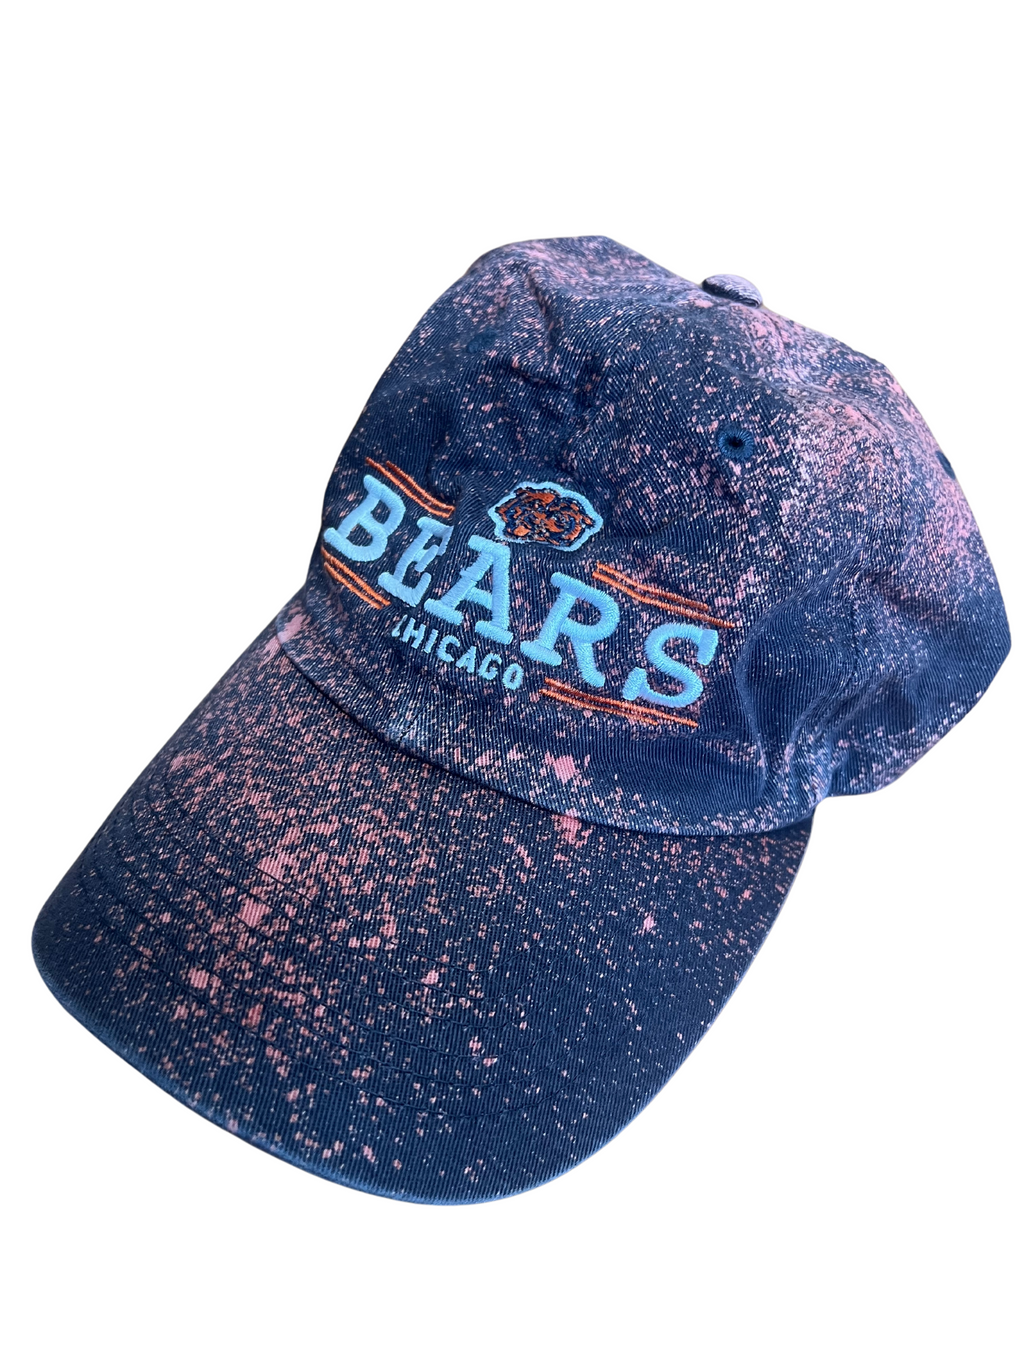 Chicago Bears Bleached Hat